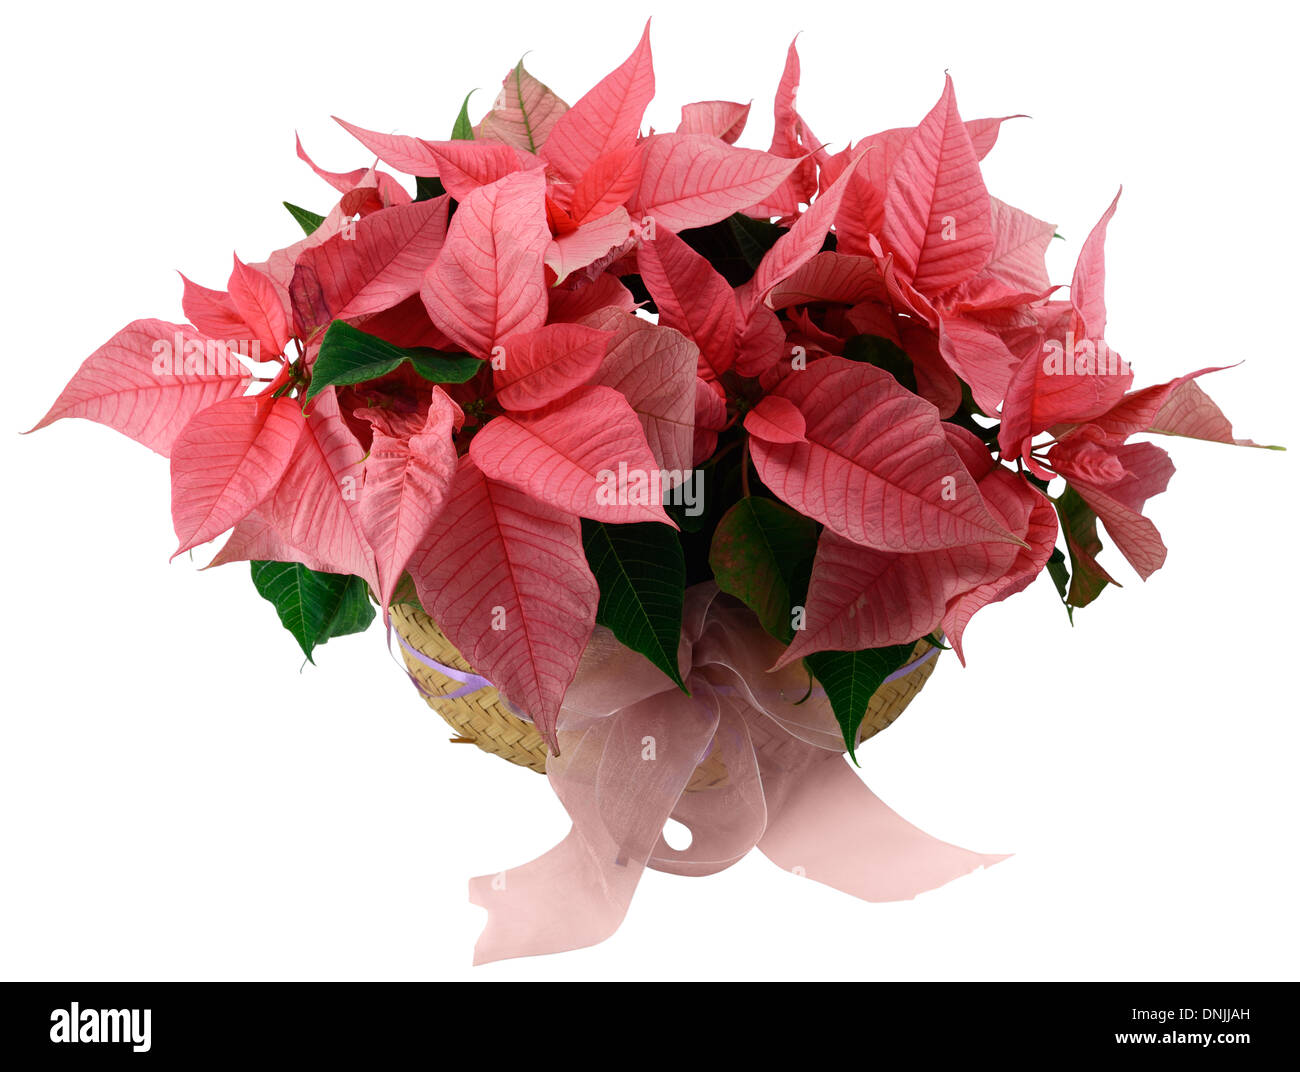 Poinsettia flower arrangement in a wicker basket isolated on white. Stock Photo